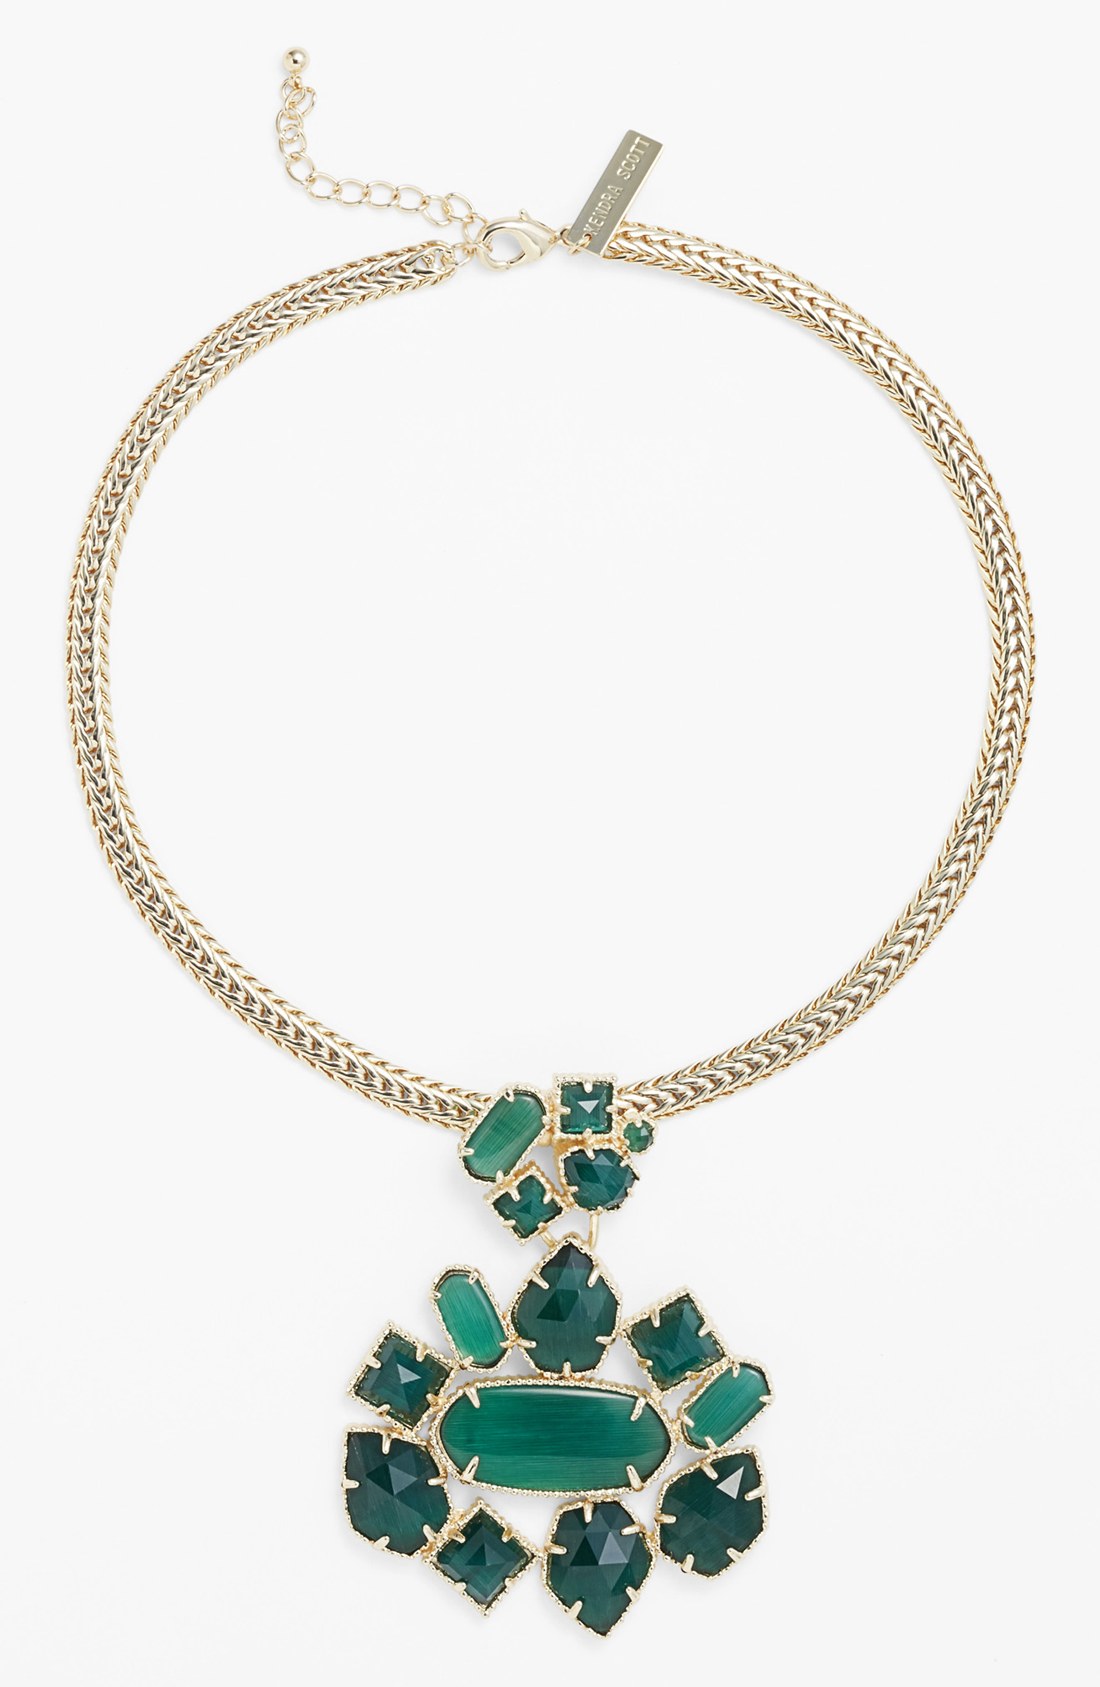 Kendra Scott Blakely Statement Pendant Necklace in Gold (Emerald ...